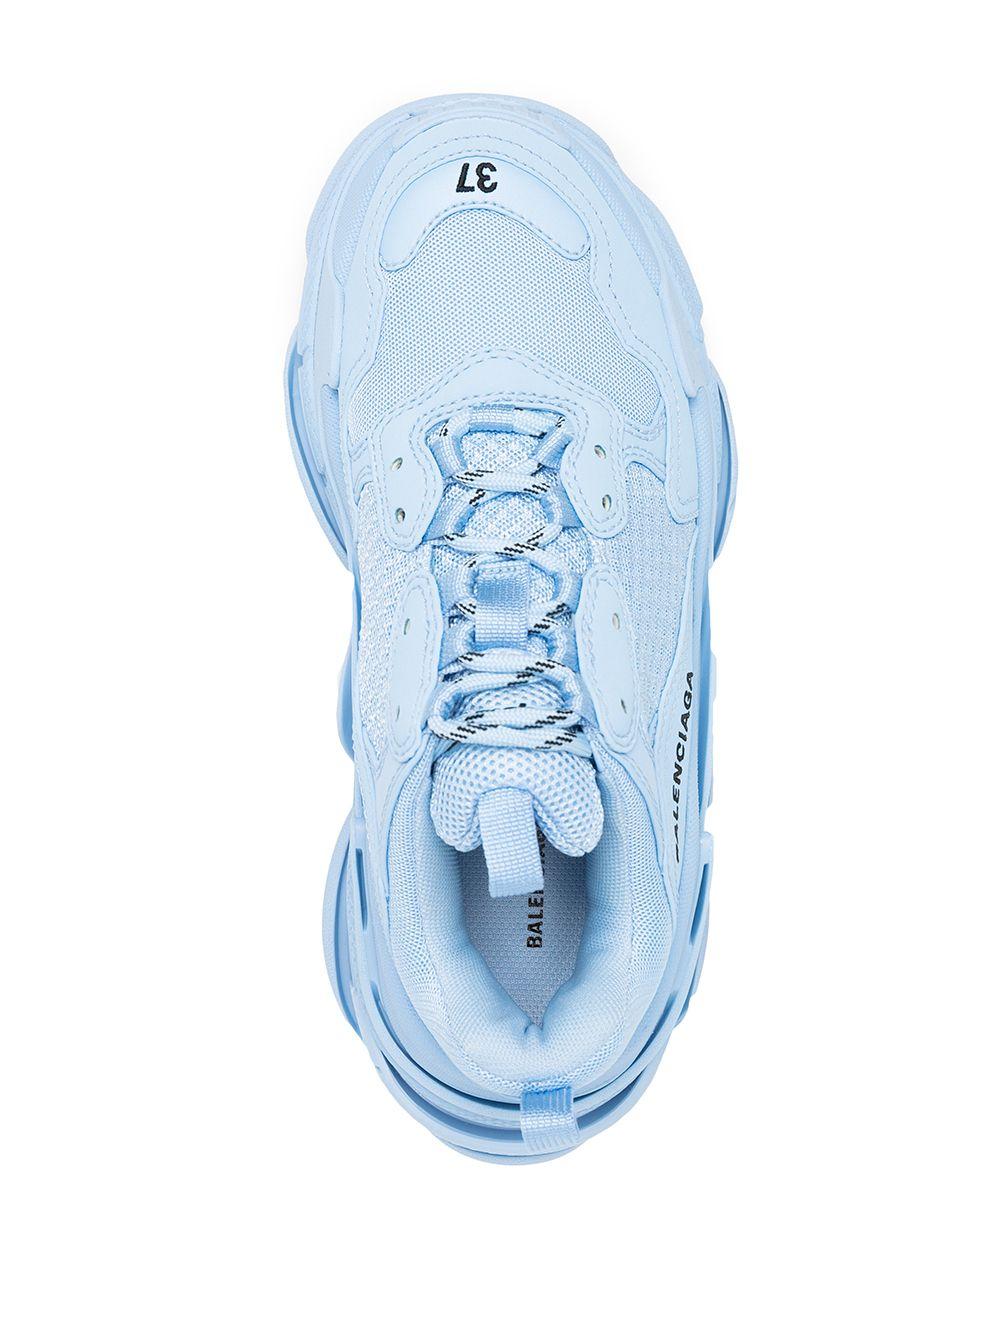 Balenciaga Synthetic Triple S Sneaker in Light Blue (Blue) - Save 41% | Lyst